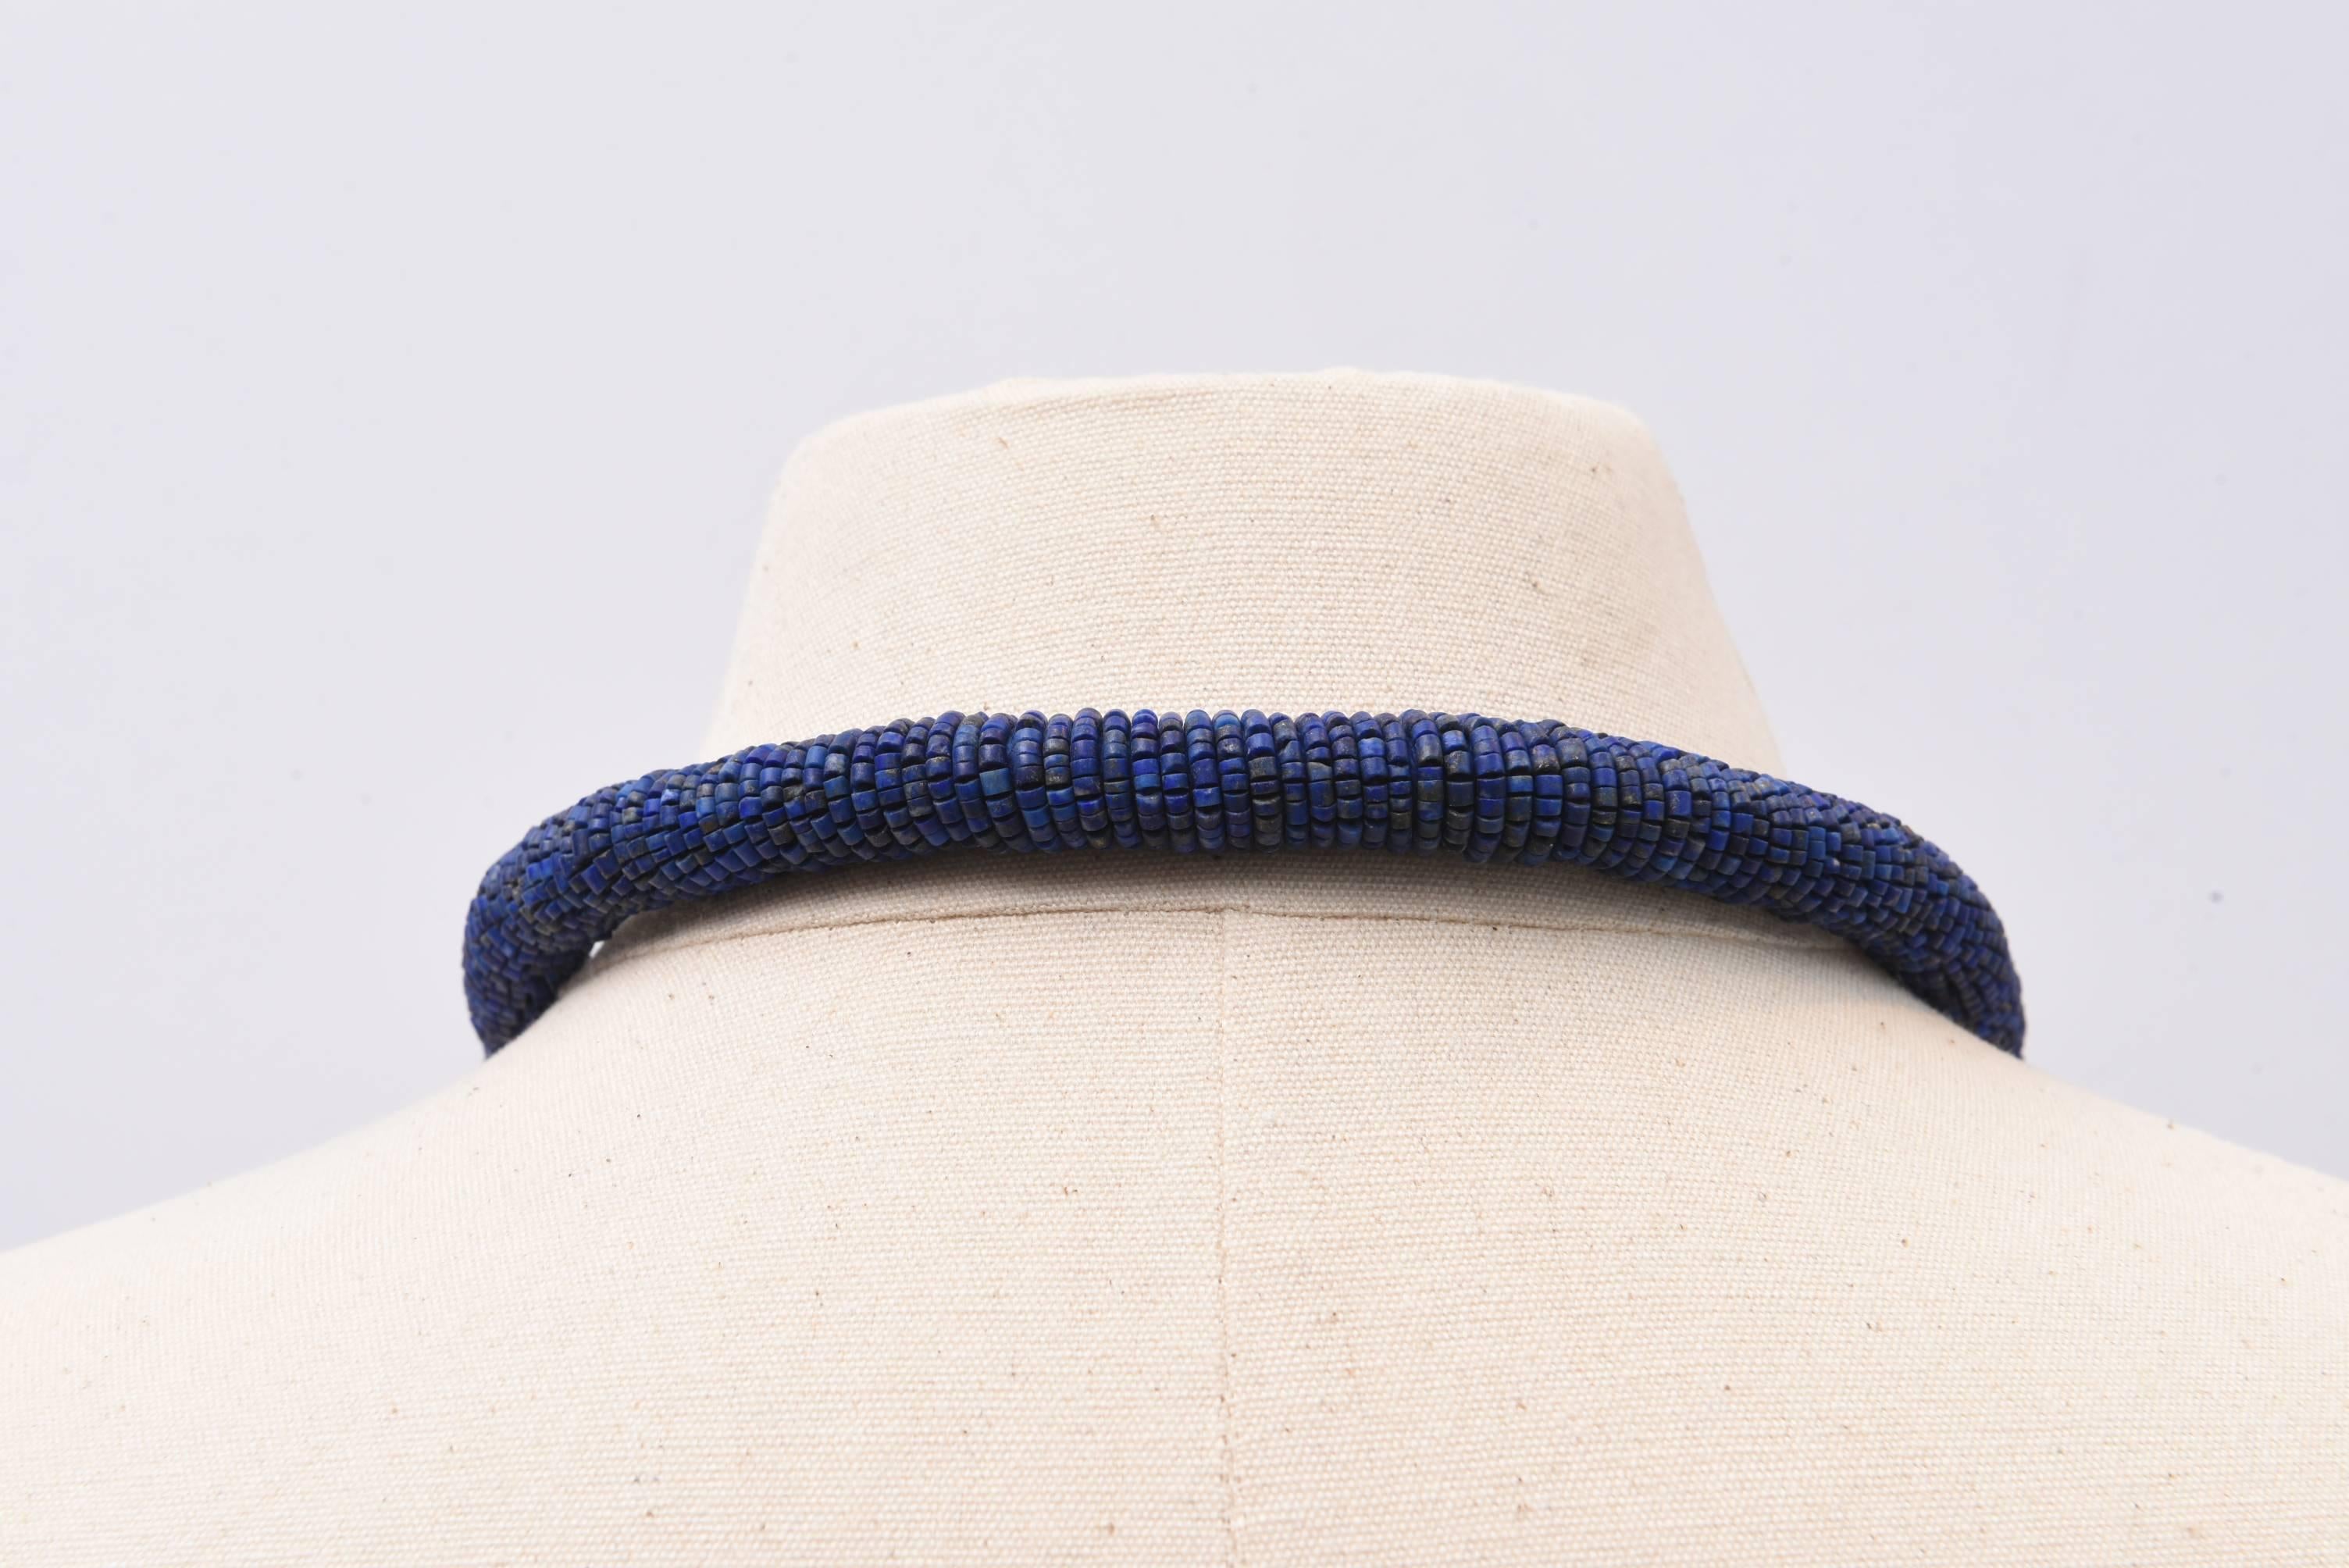 All hand-woven lapis lazuli beaded necklace with textured sterling silver beads at the collar bone.  30 strands fall below the beads.  All natural, great color lapis.  Inside circumference is 35 inches.